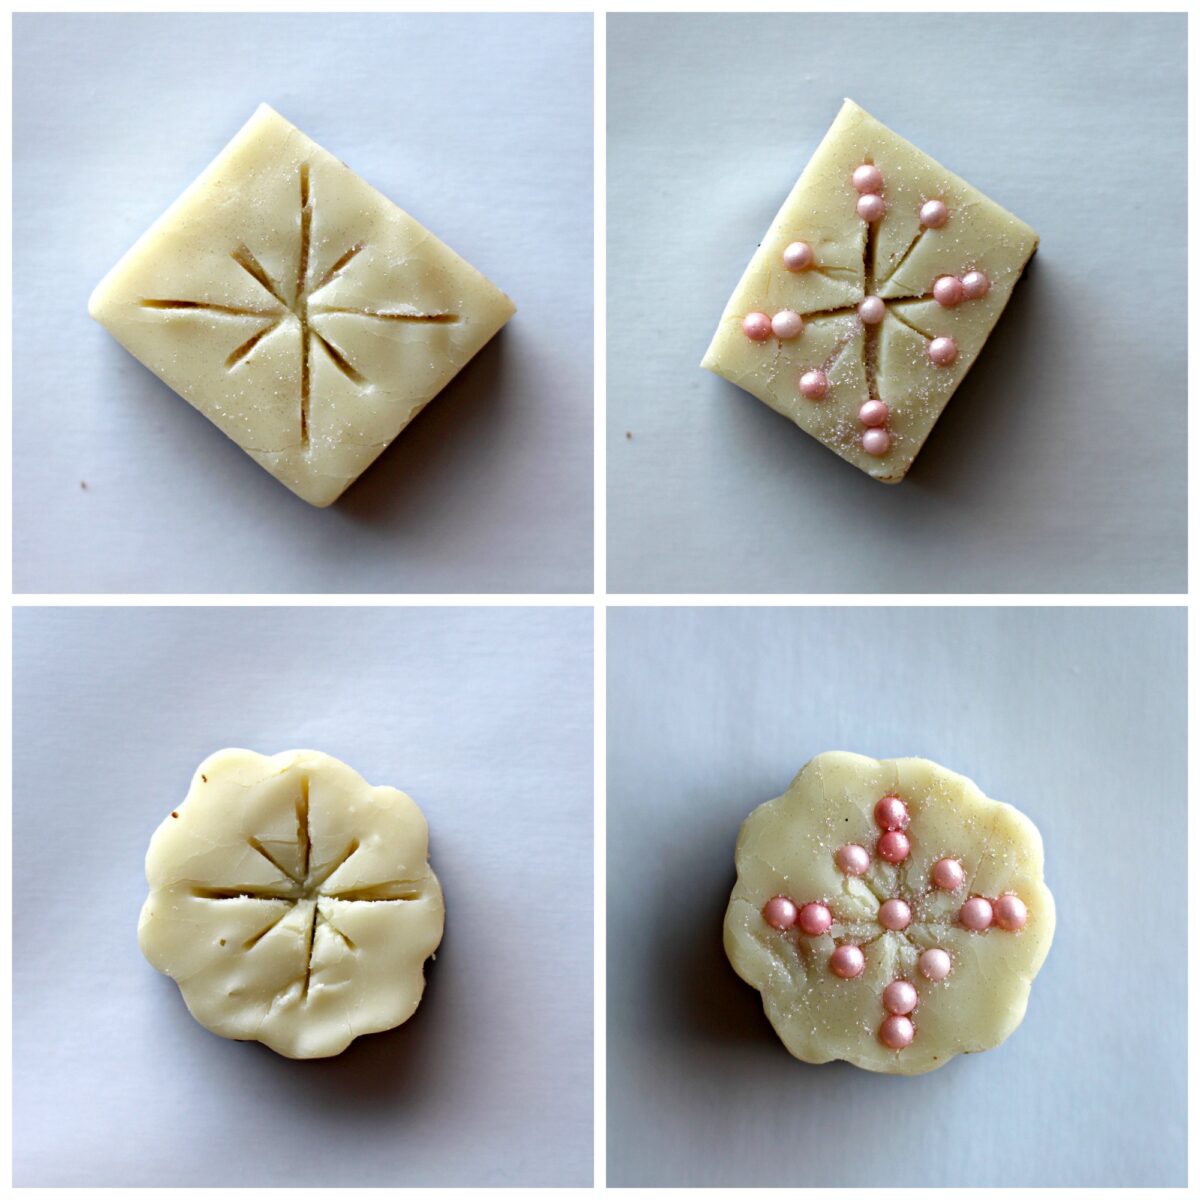 Decorating instructions: slice snowflake pattern on top of fudge, insert candy pearls into slices.